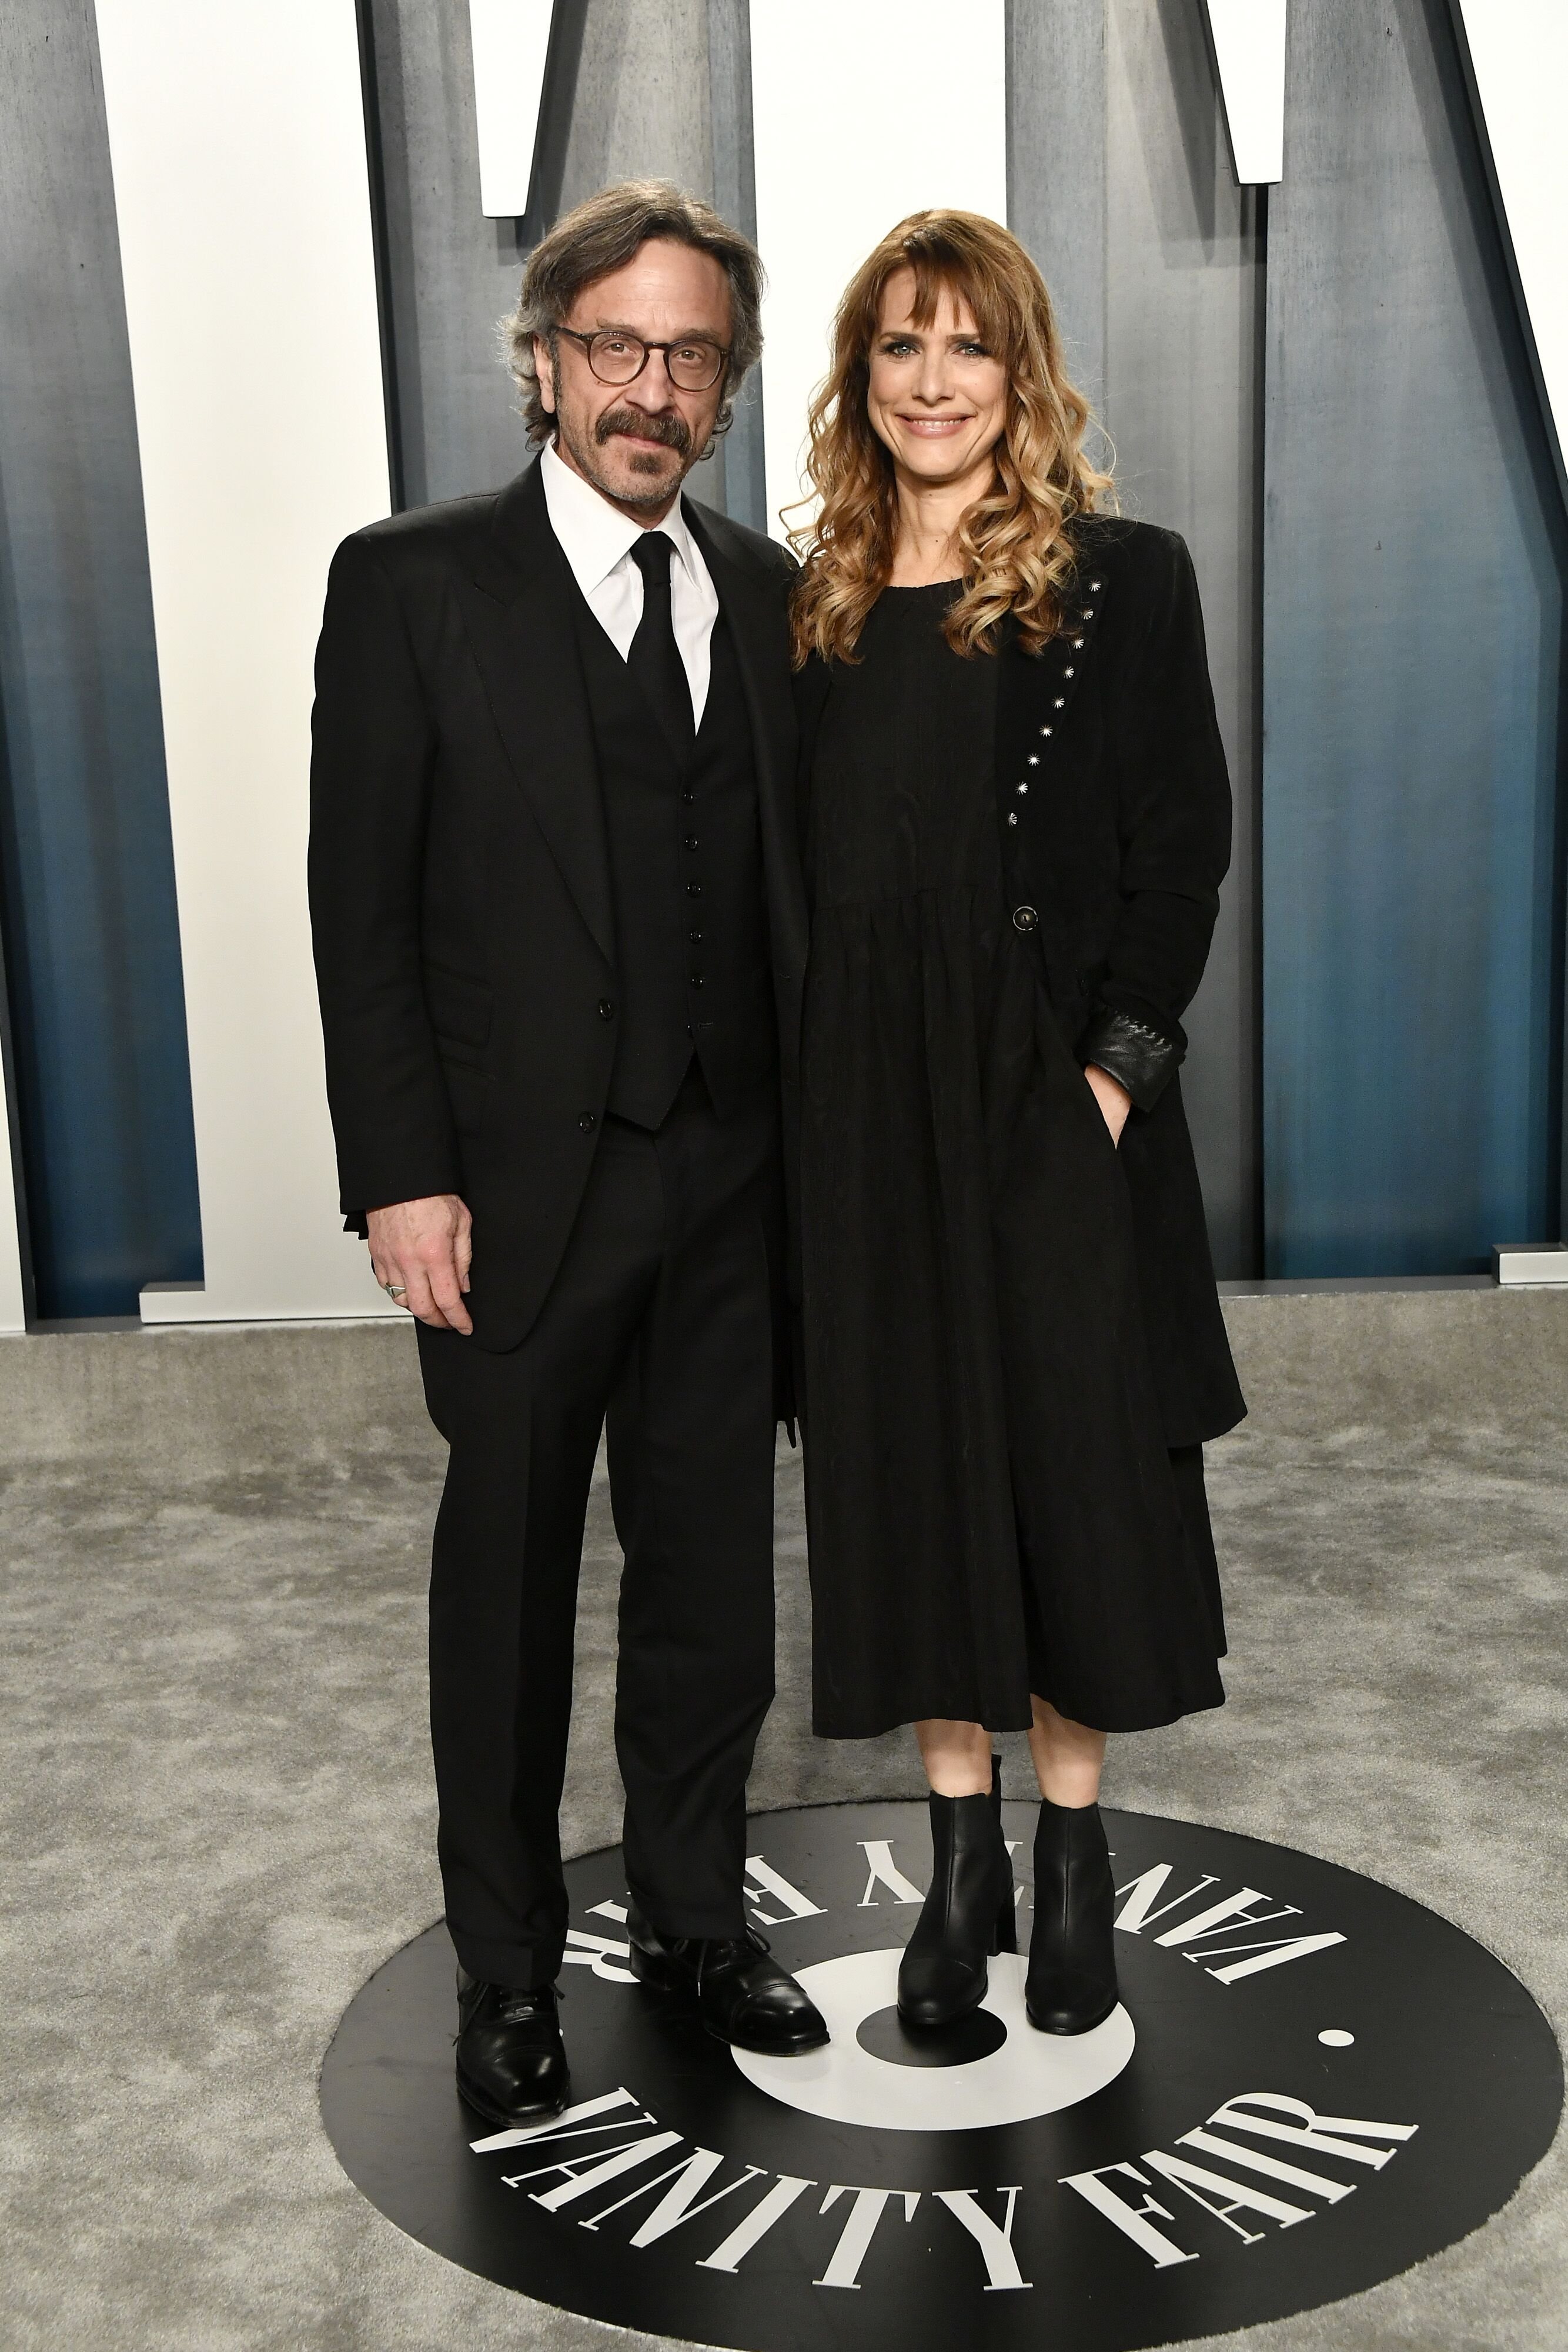 Marc Maron and Lynn Shelton at the Vanity Fair Oscar Party on February 09, 2020 in Beverly Hills, California | Photo: Getty Images